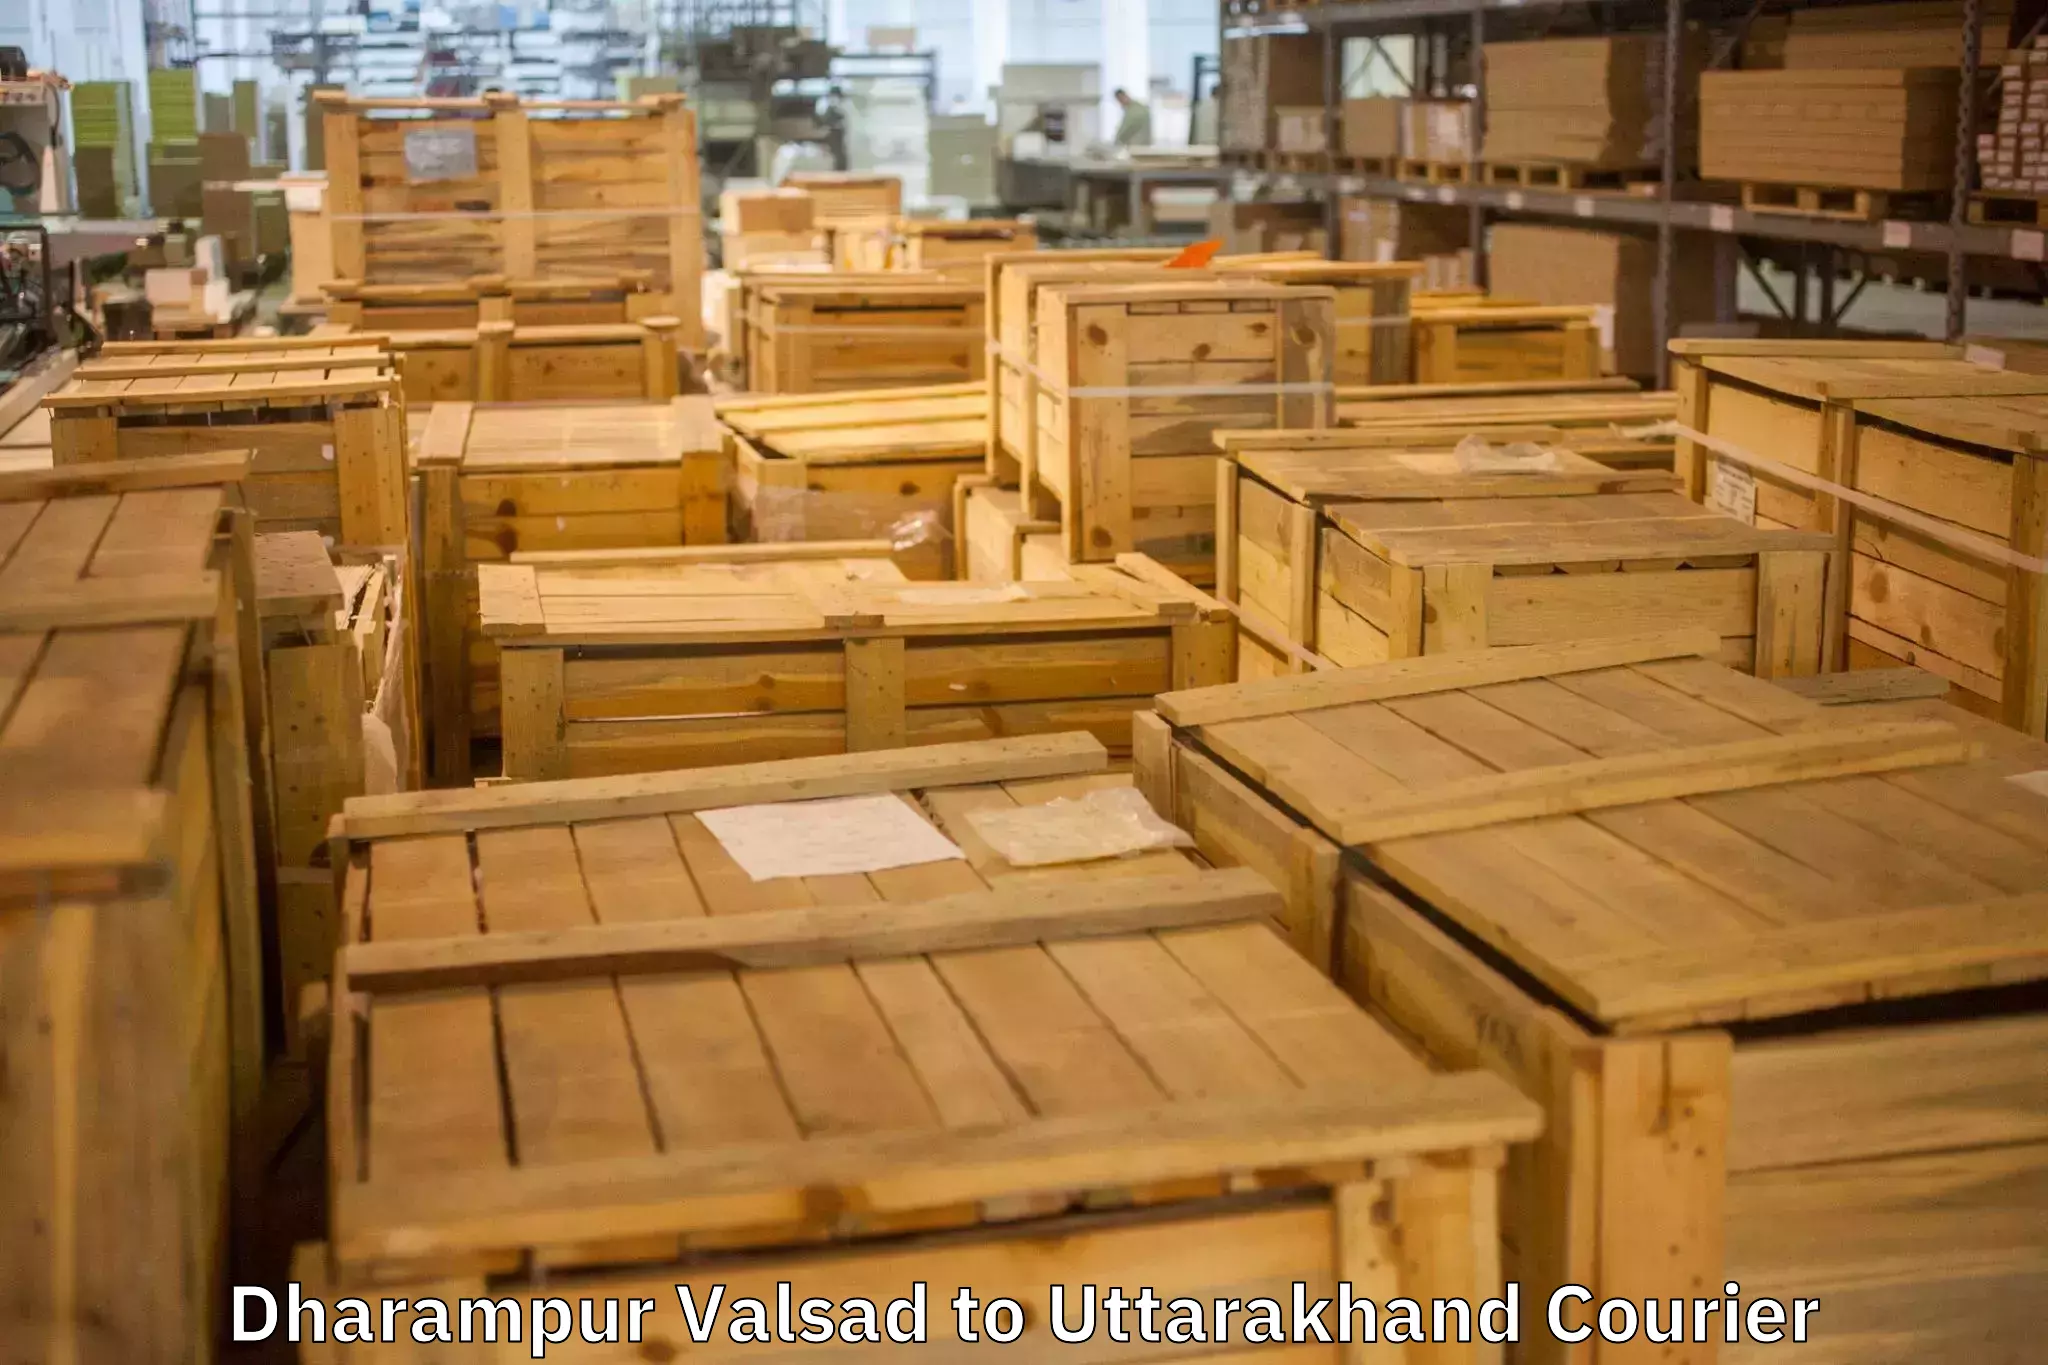 Professional packing services Dharampur Valsad to Tehri Garhwal